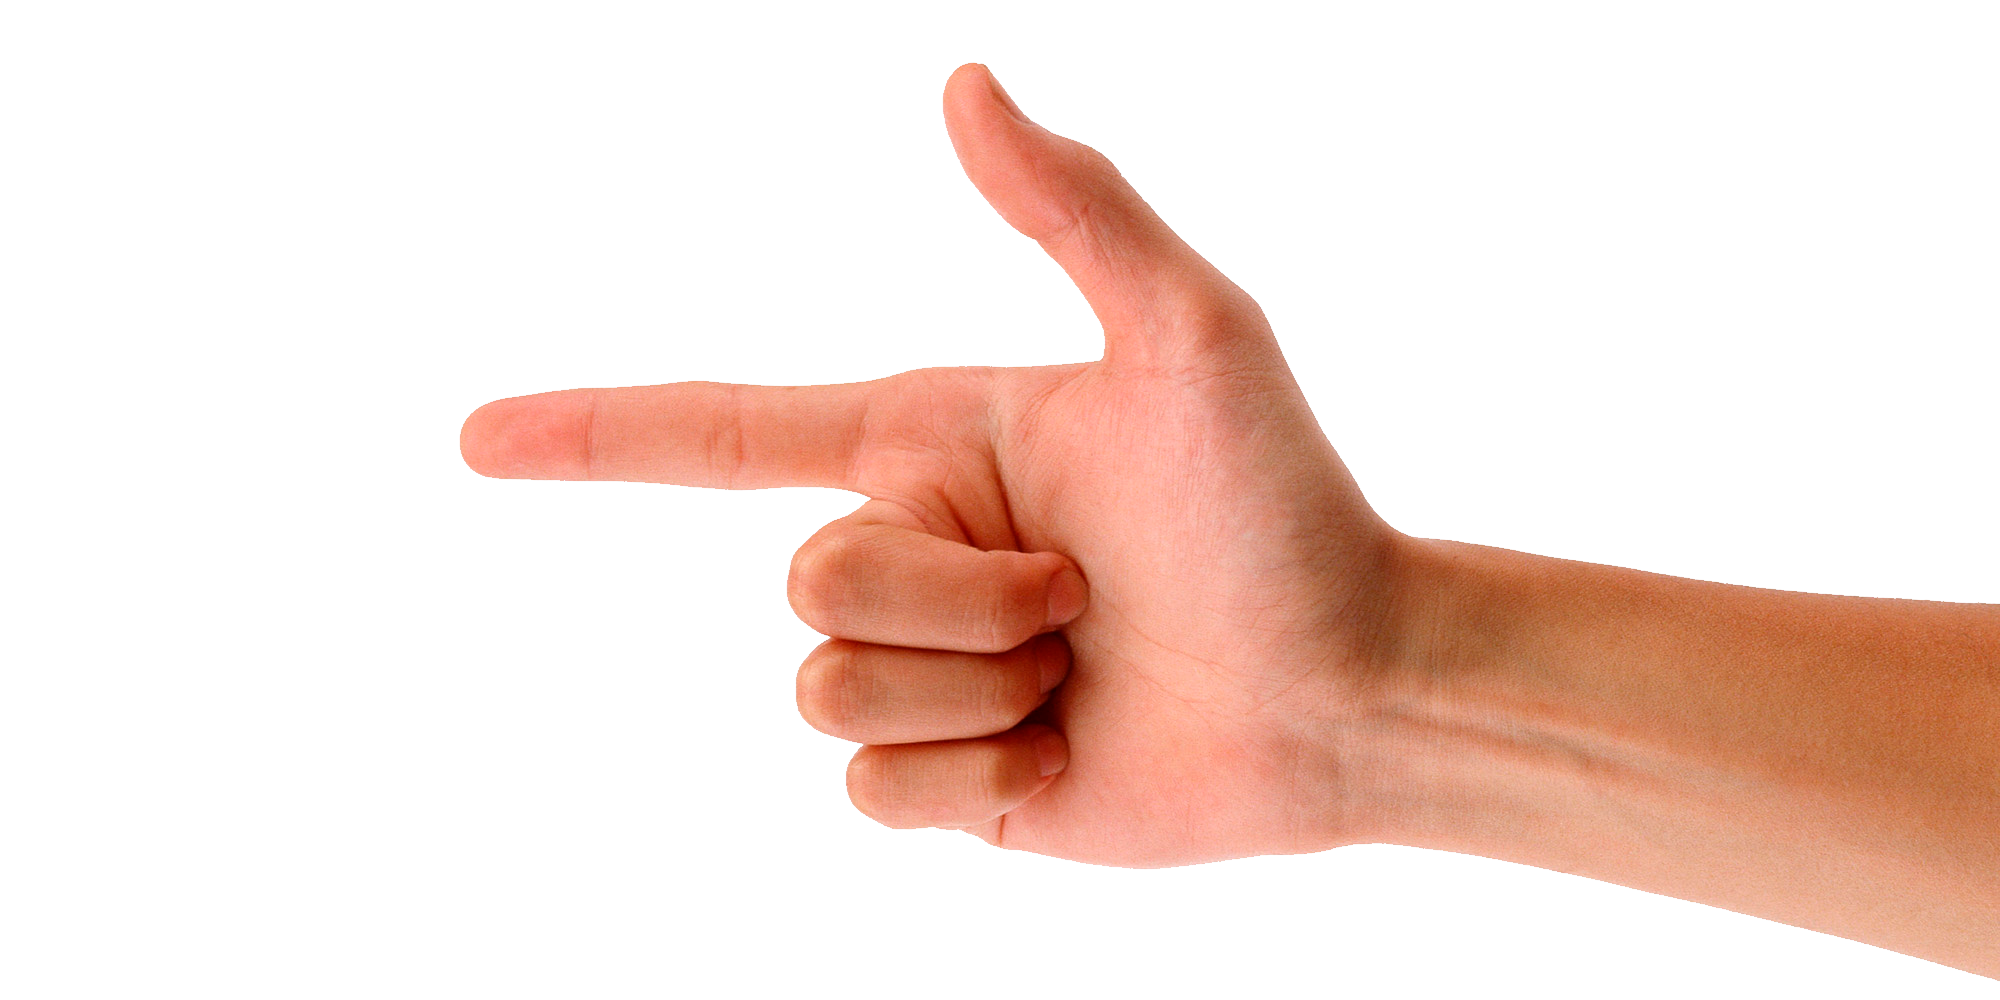 Fingers clipart pinkie finger. Png images free download